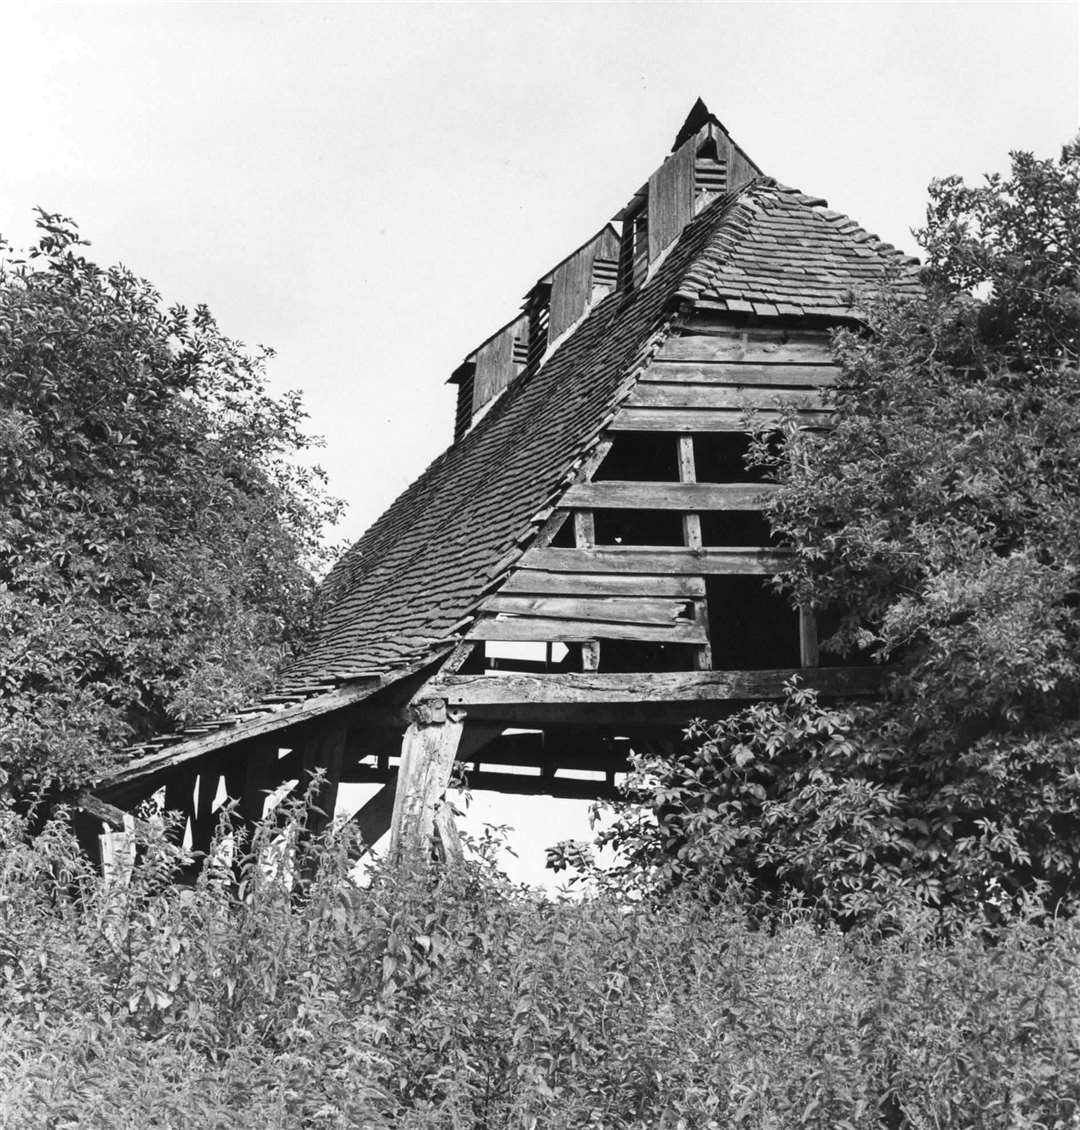 In August 1981, an Old Barn in Hollingbourne had to be demolished to make way for a section of the M20 motorway